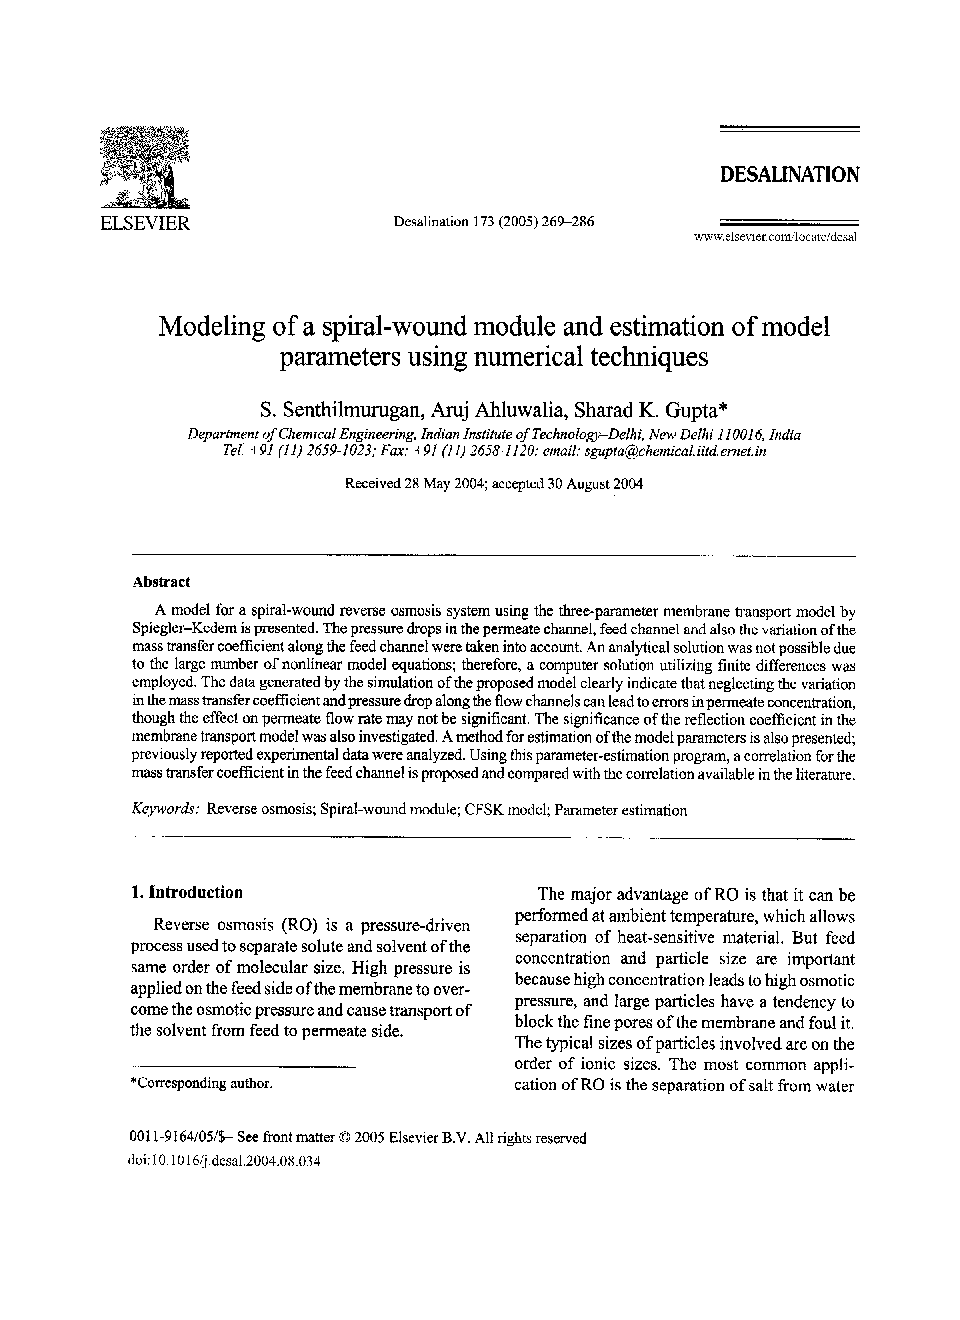 Modeling of a spiral-wound module and estimation of model parameters using numerical techniques